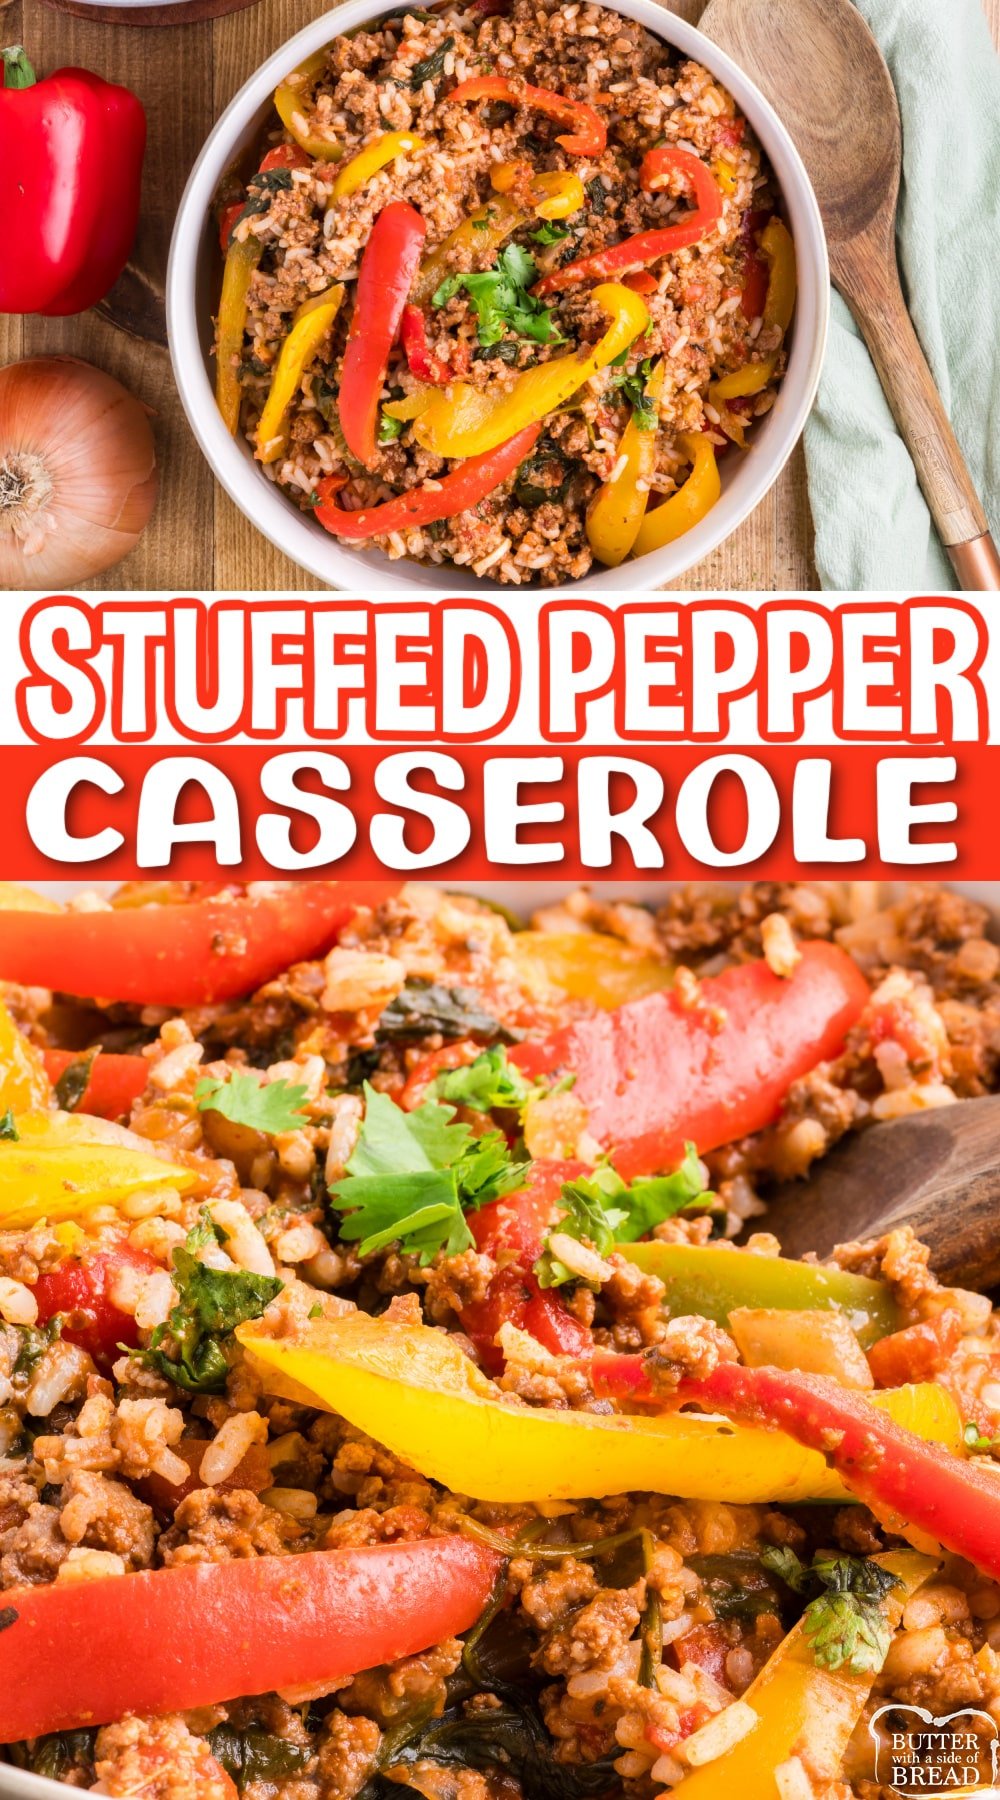 One-Pot Stuffed Pepper Casserole made in less than 30 minutes is the perfect weeknight dinner recipe. Delicious casserole recipe made with ground beef, rice, peppers, and tons of flavor! 